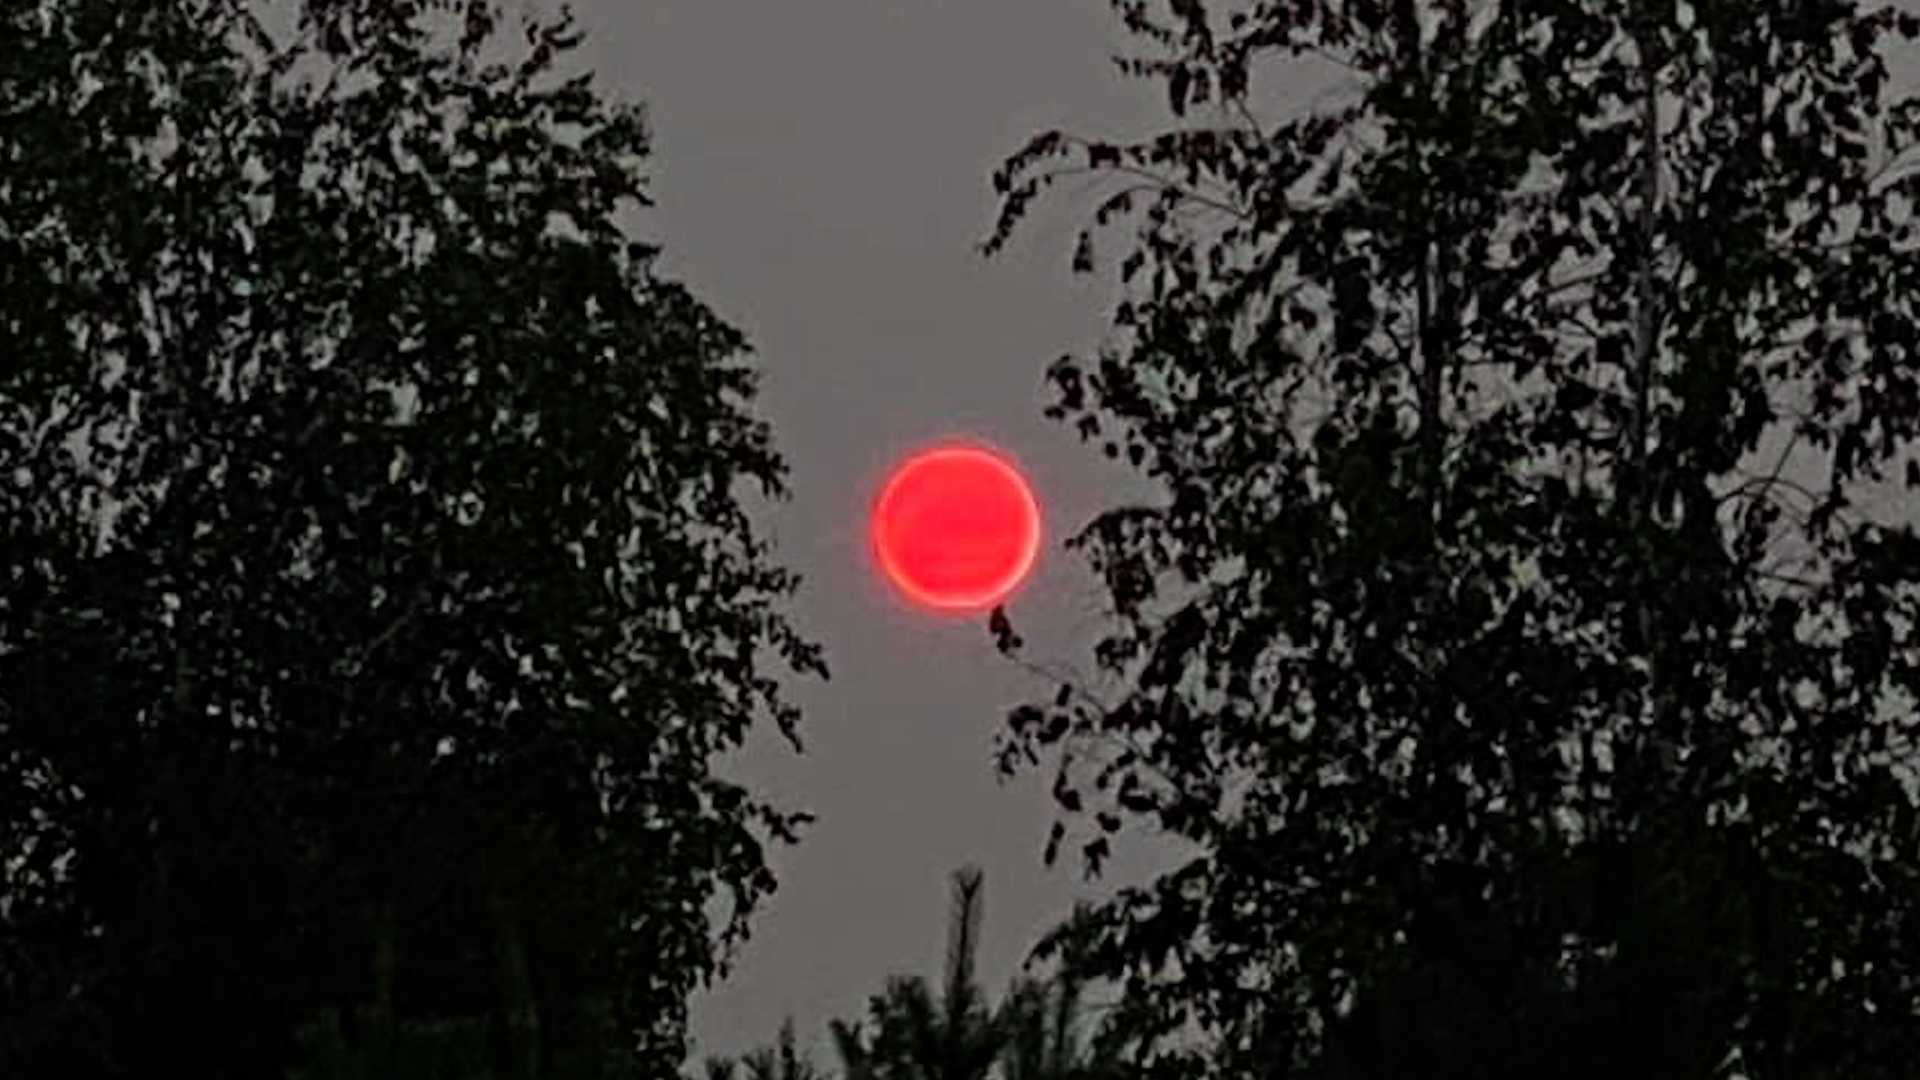 Sun appears bright orangered due to hazy conditions caused by smoke from the western wildfires